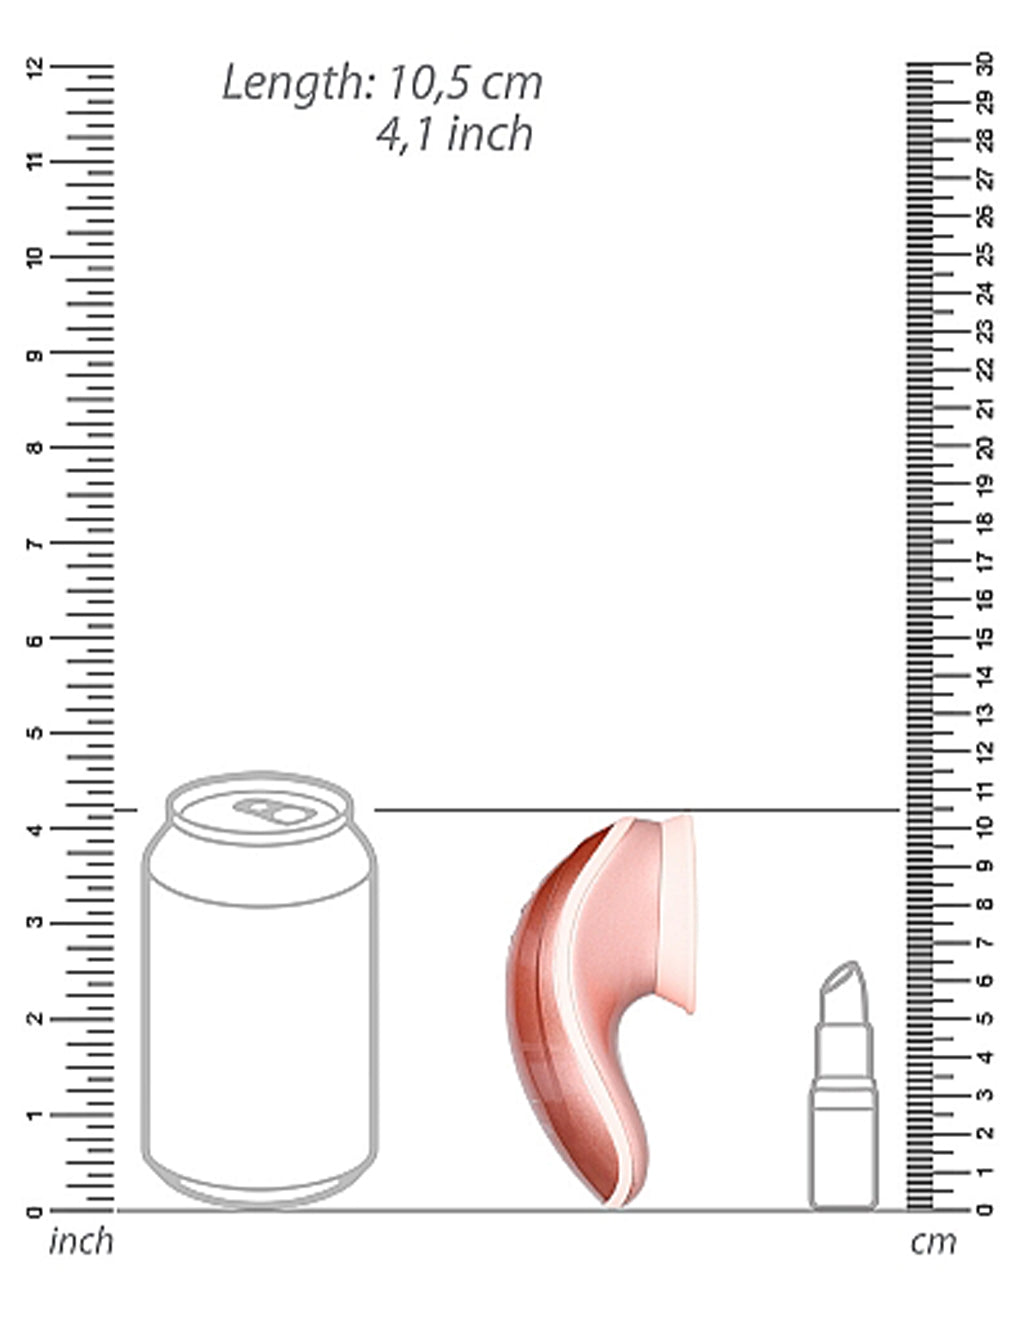 Twitch Innovation Suction Vibrator- Size Dimensions